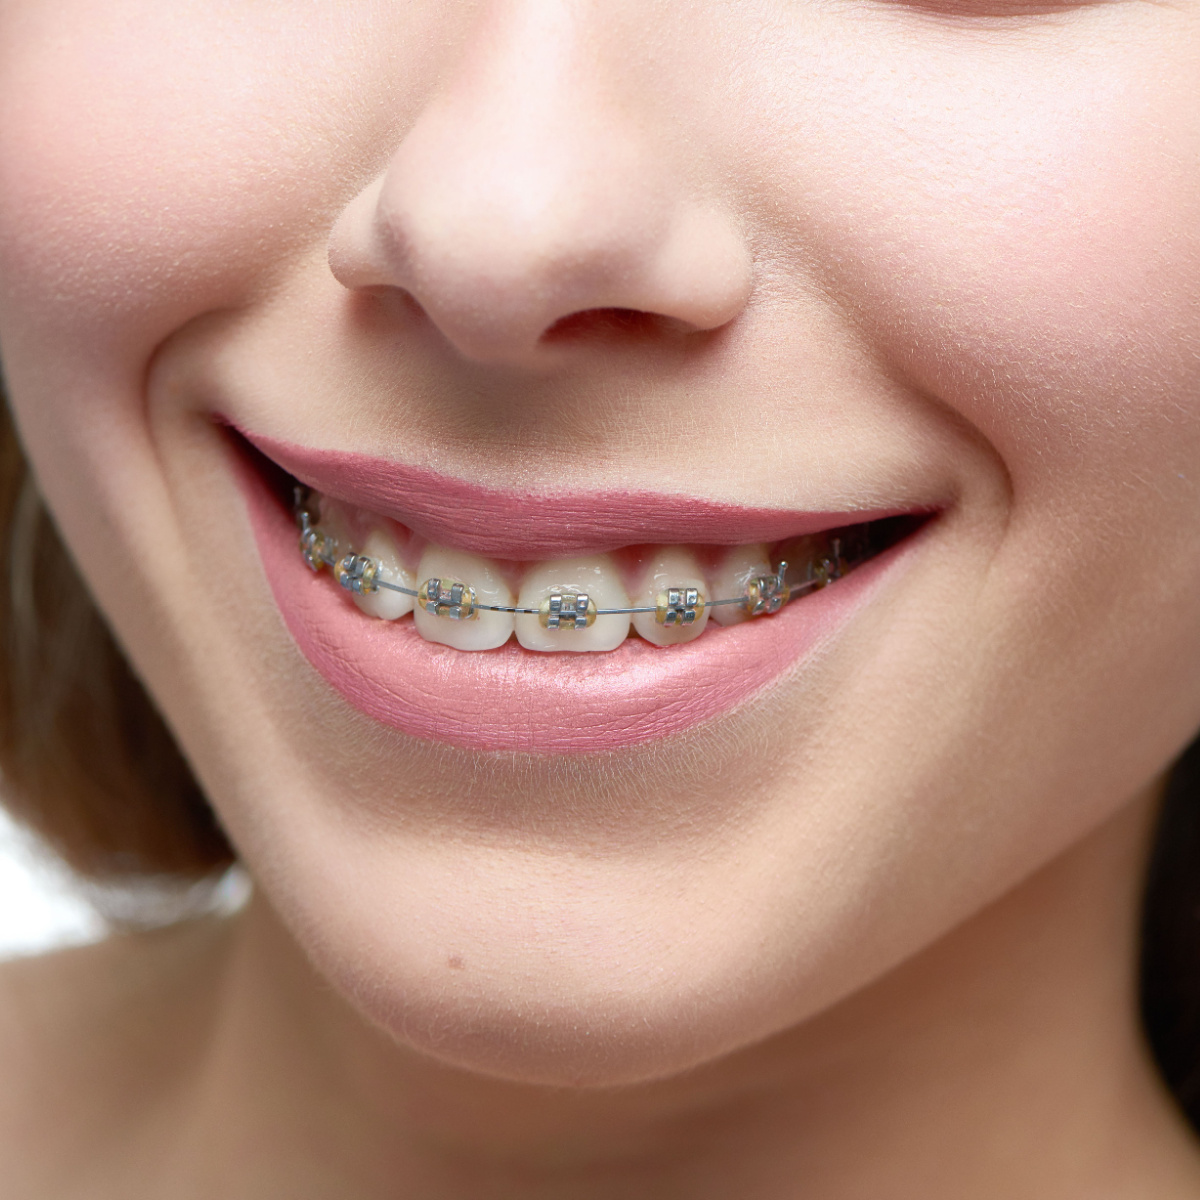 Use these tips to care for your South Houston braces.